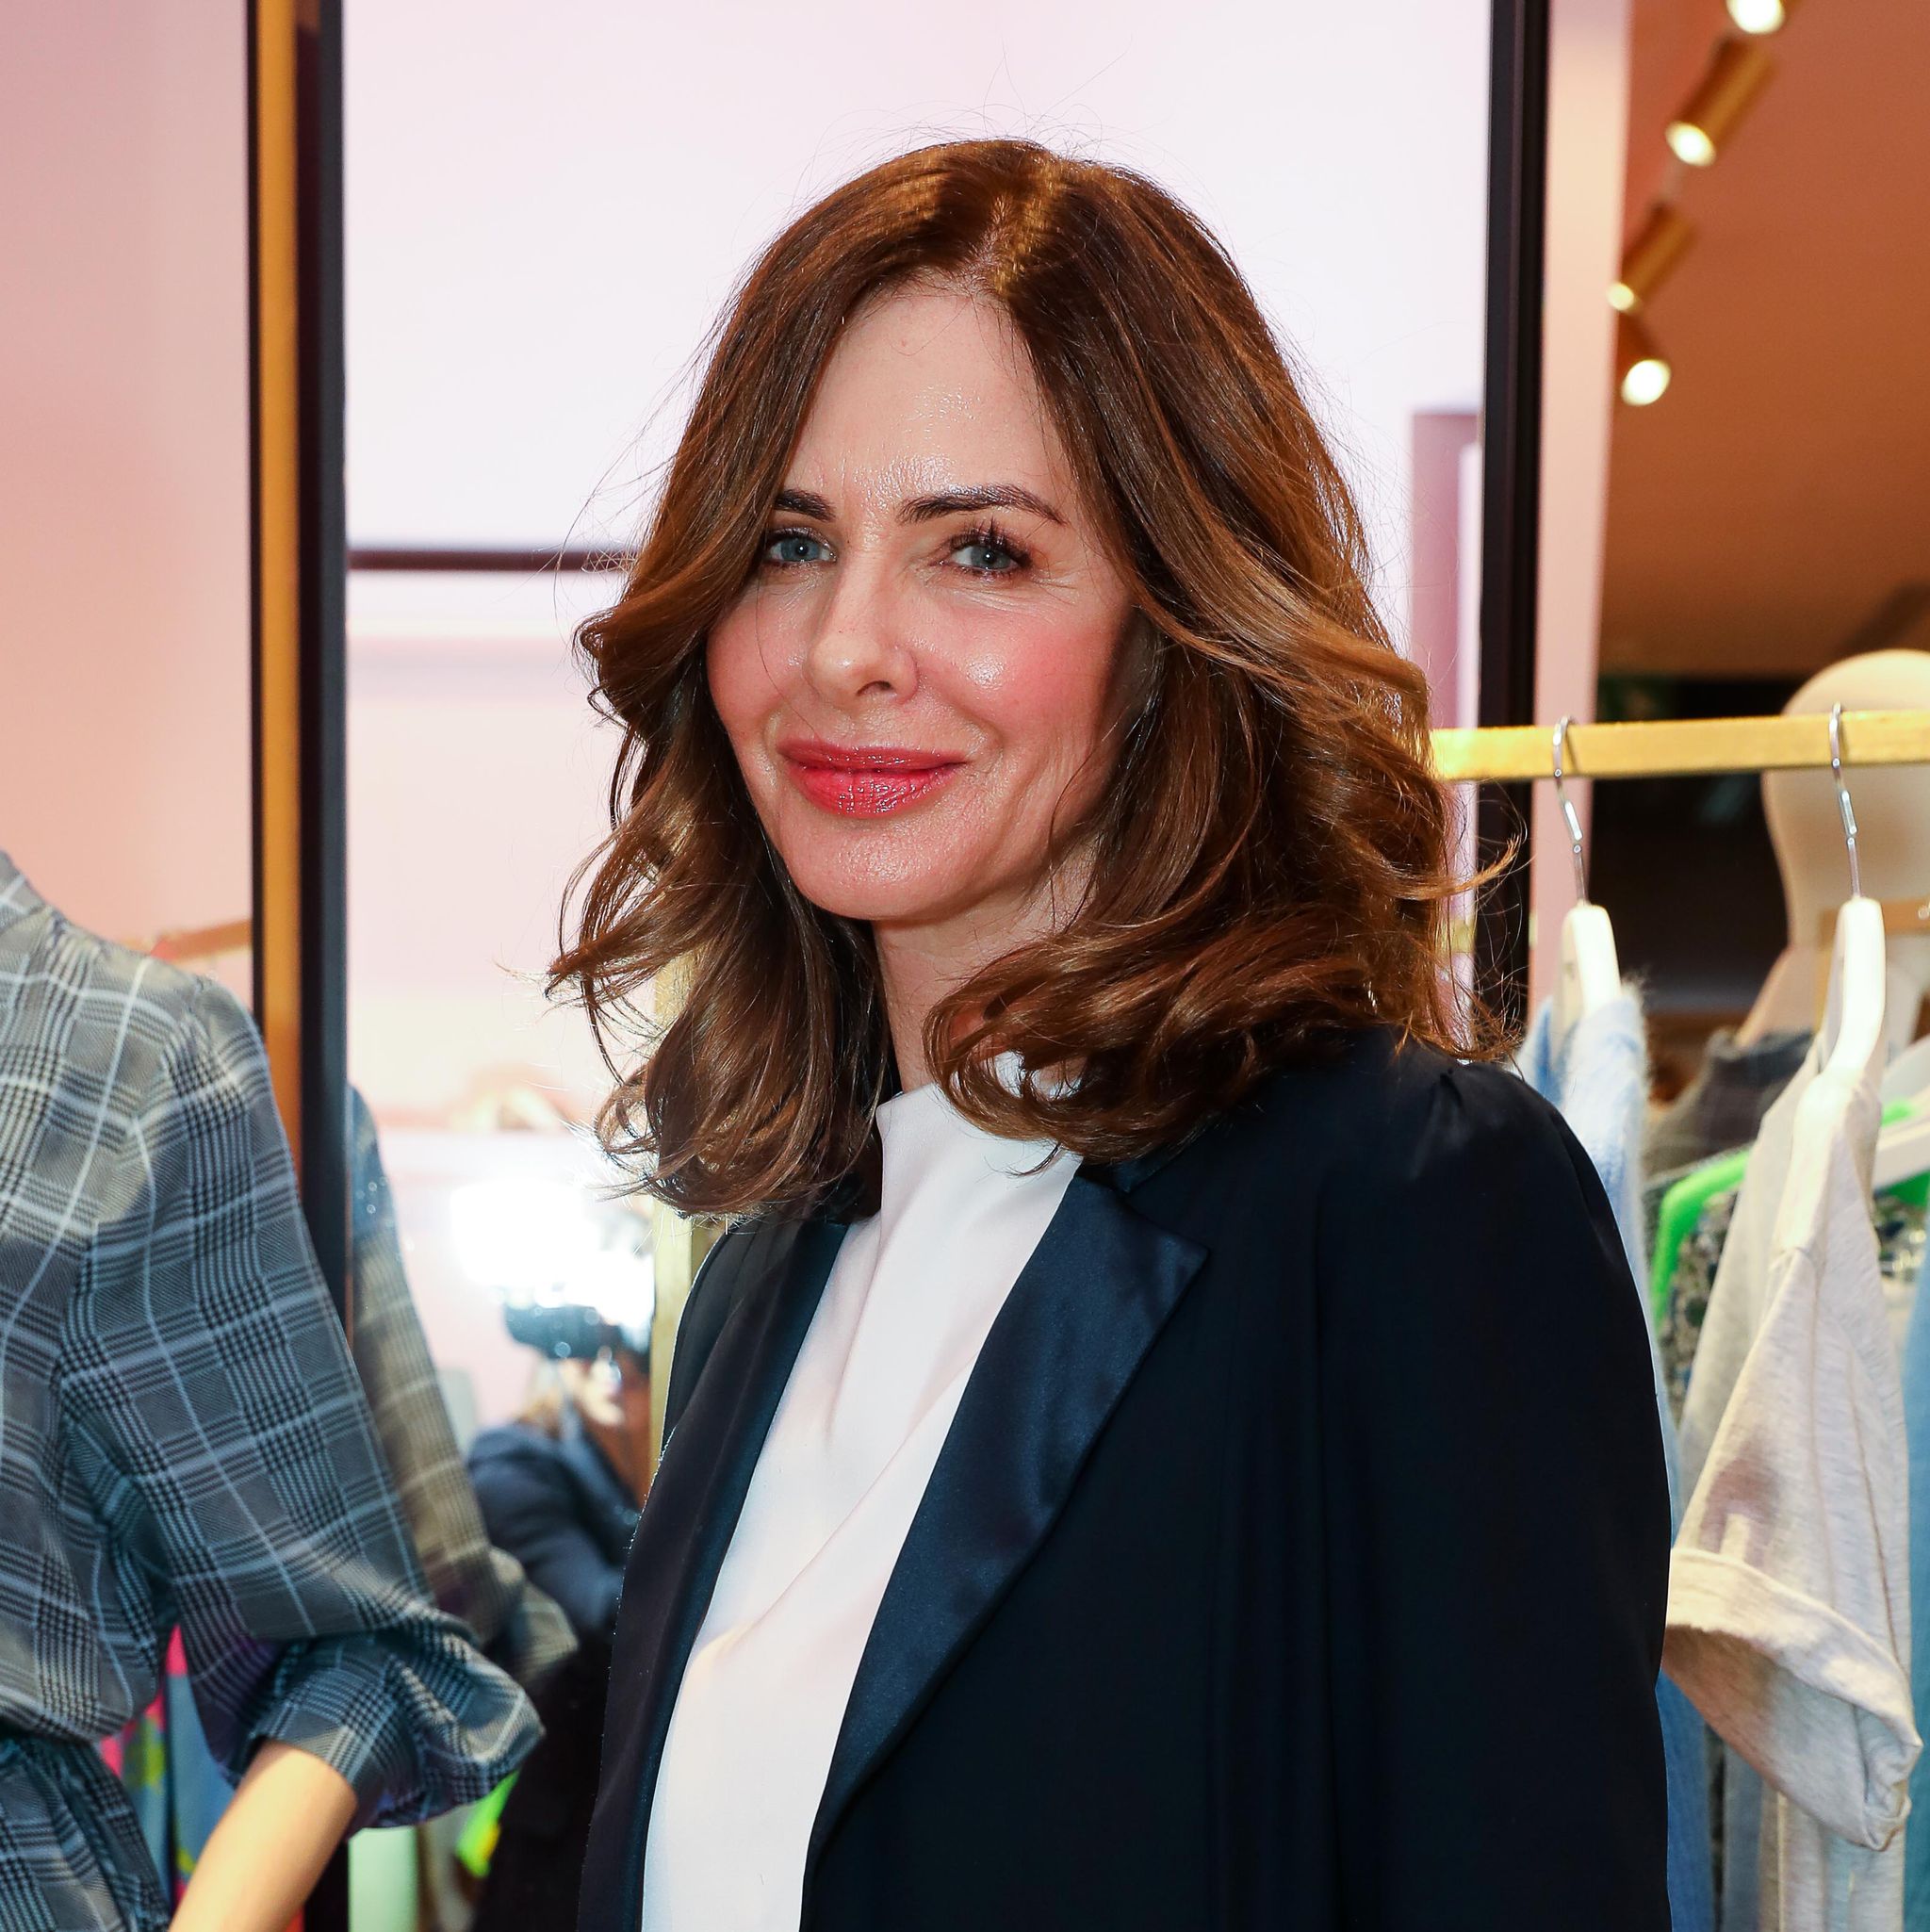 https://hips.hearstapps.com/hmg-prod/images/trinny-woodall-attends-the-launch-of-essential-antwerps-news-photo-1586445155.jpg?crop=0.754xw:0.528xh;0.114xw,0&resize=2048:*